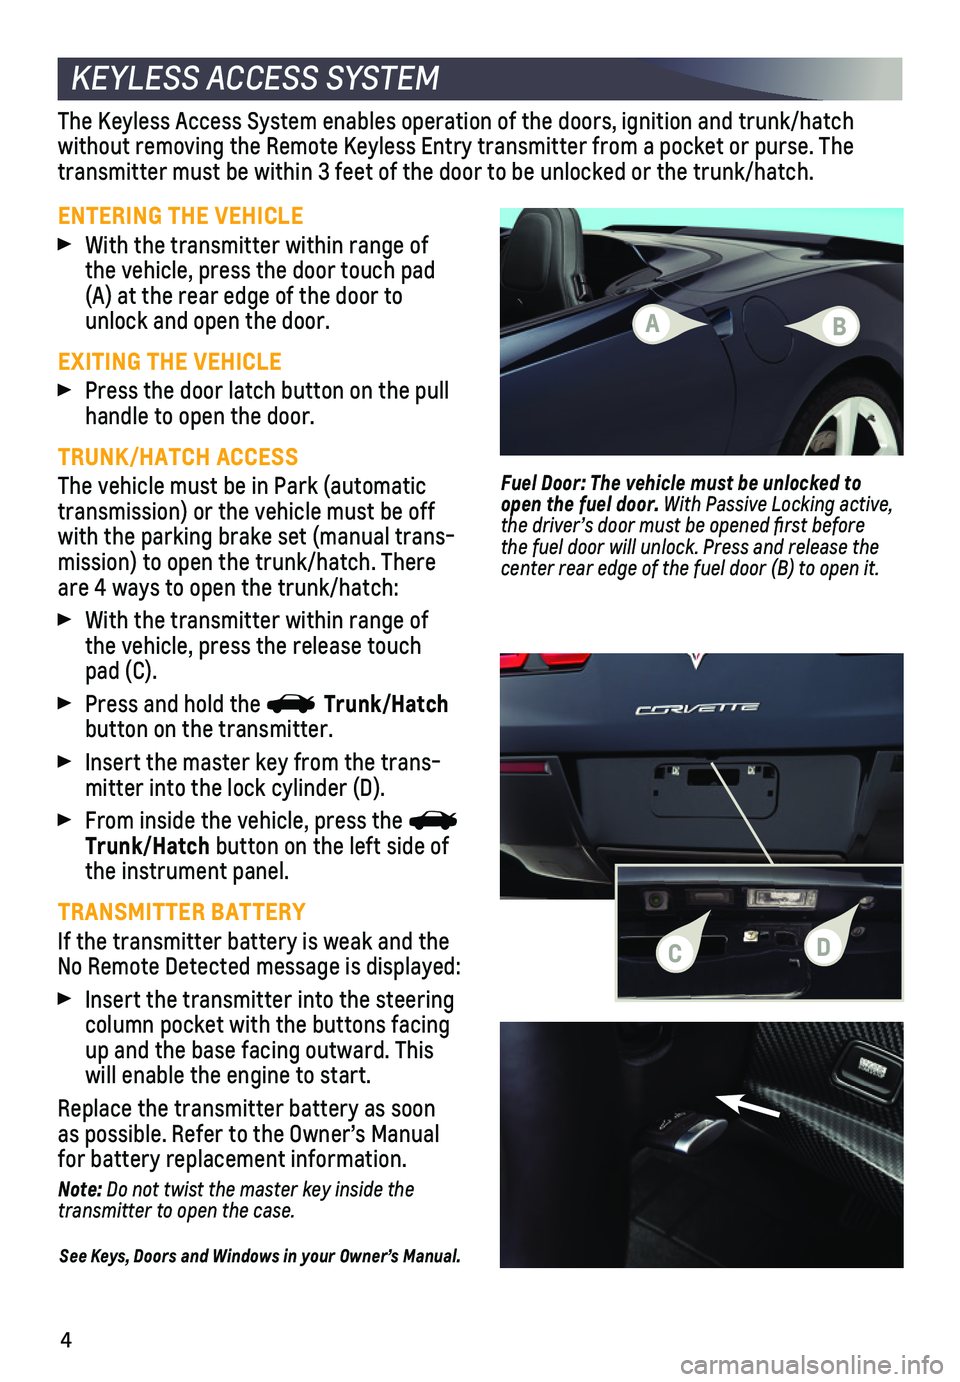 CHEVROLET CORVETTE 2019  Get To Know Guide 4
KEYLESS ACCESS SYSTEM
ENTERING THE VEHICLE
 With the transmitter within range of the vehicle, press the door touch pad (A) at the rear edge of the door to unlock and open the door.
EXITING THE VEHIC